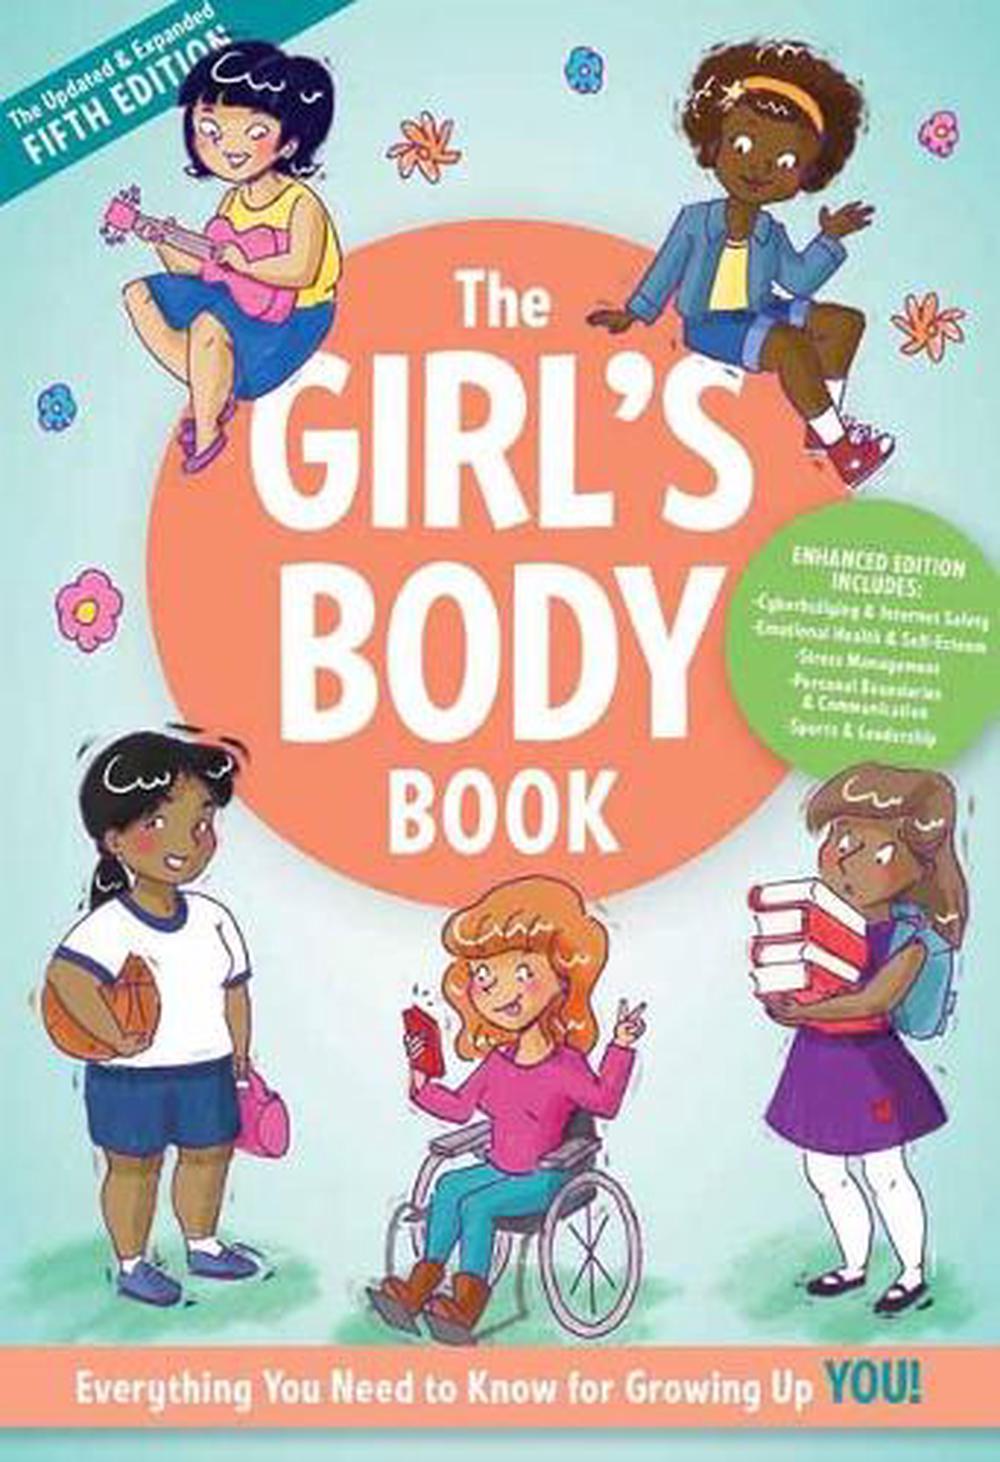 body books for 6 year olds